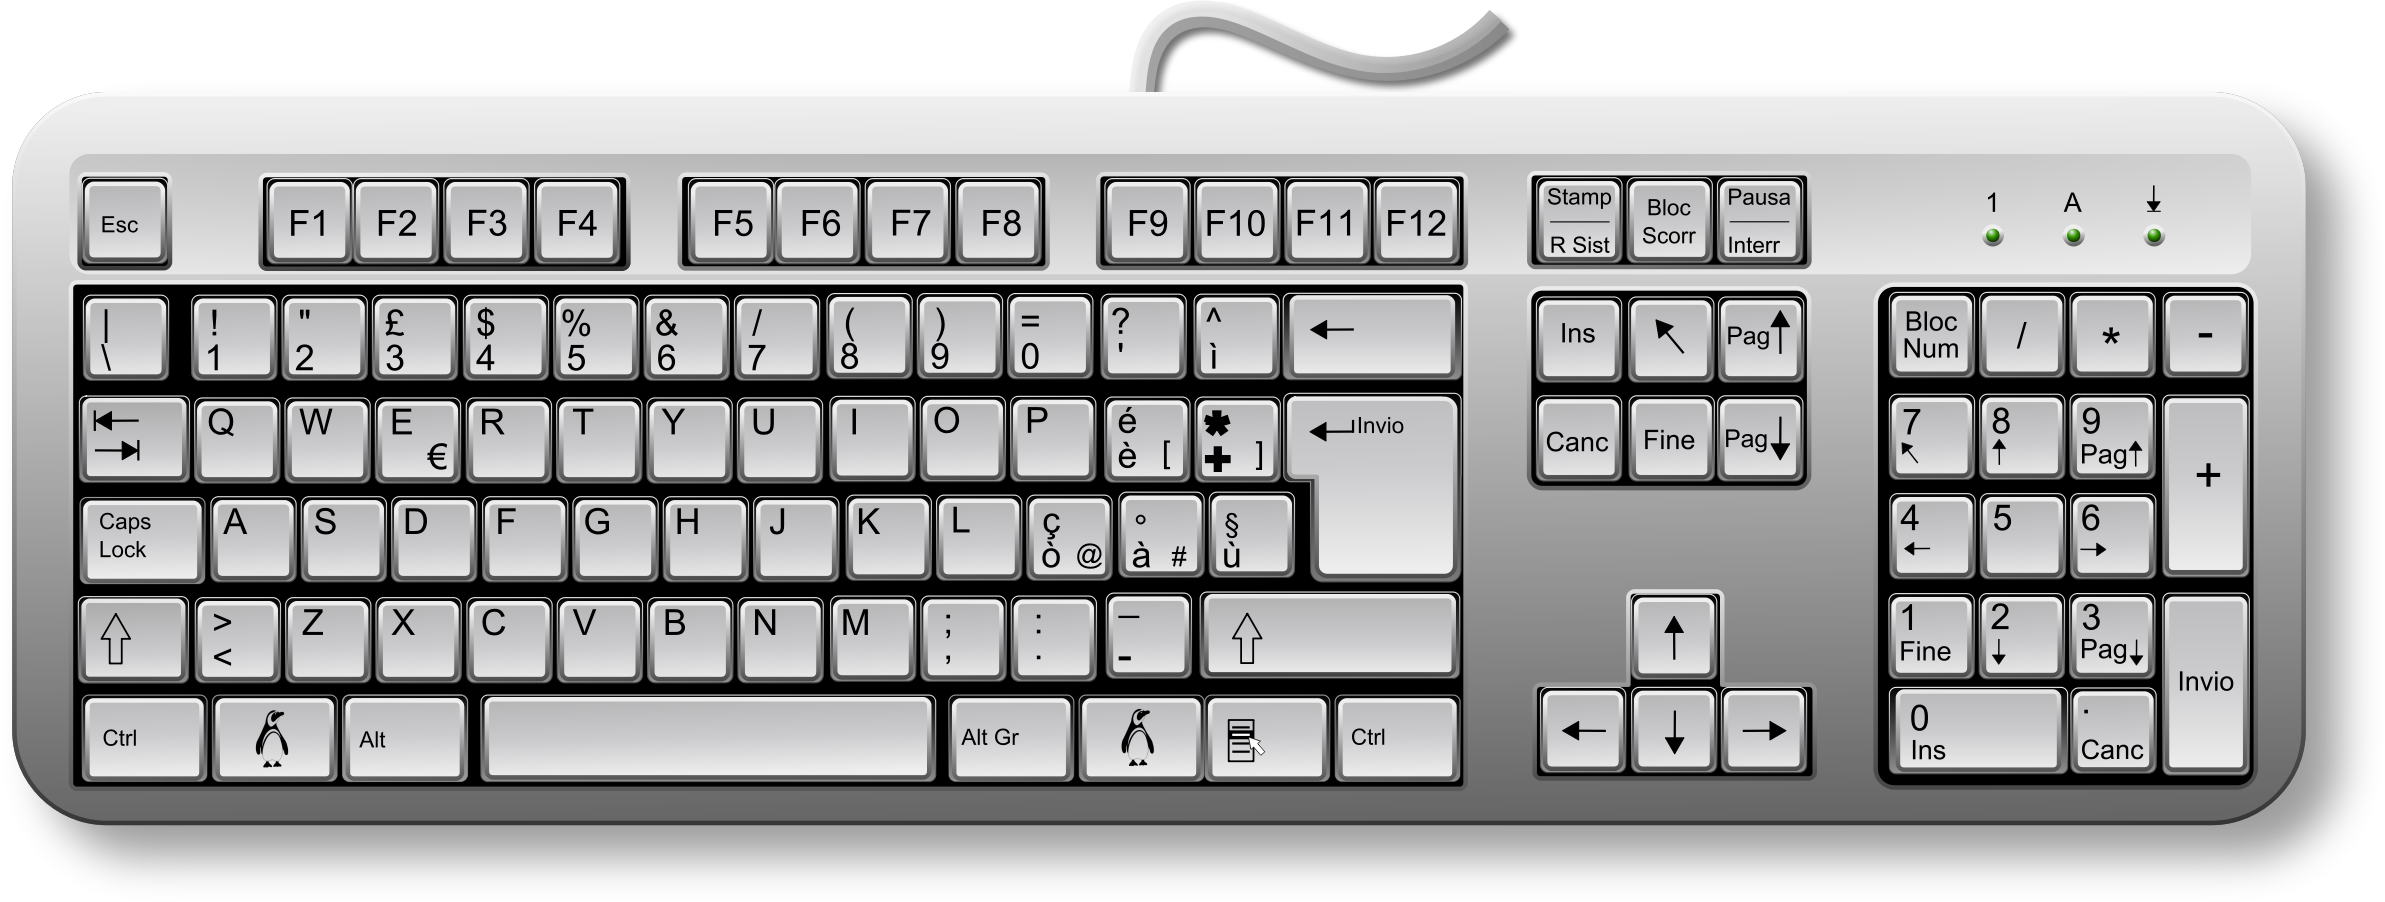 clipart for keyboard - photo #36